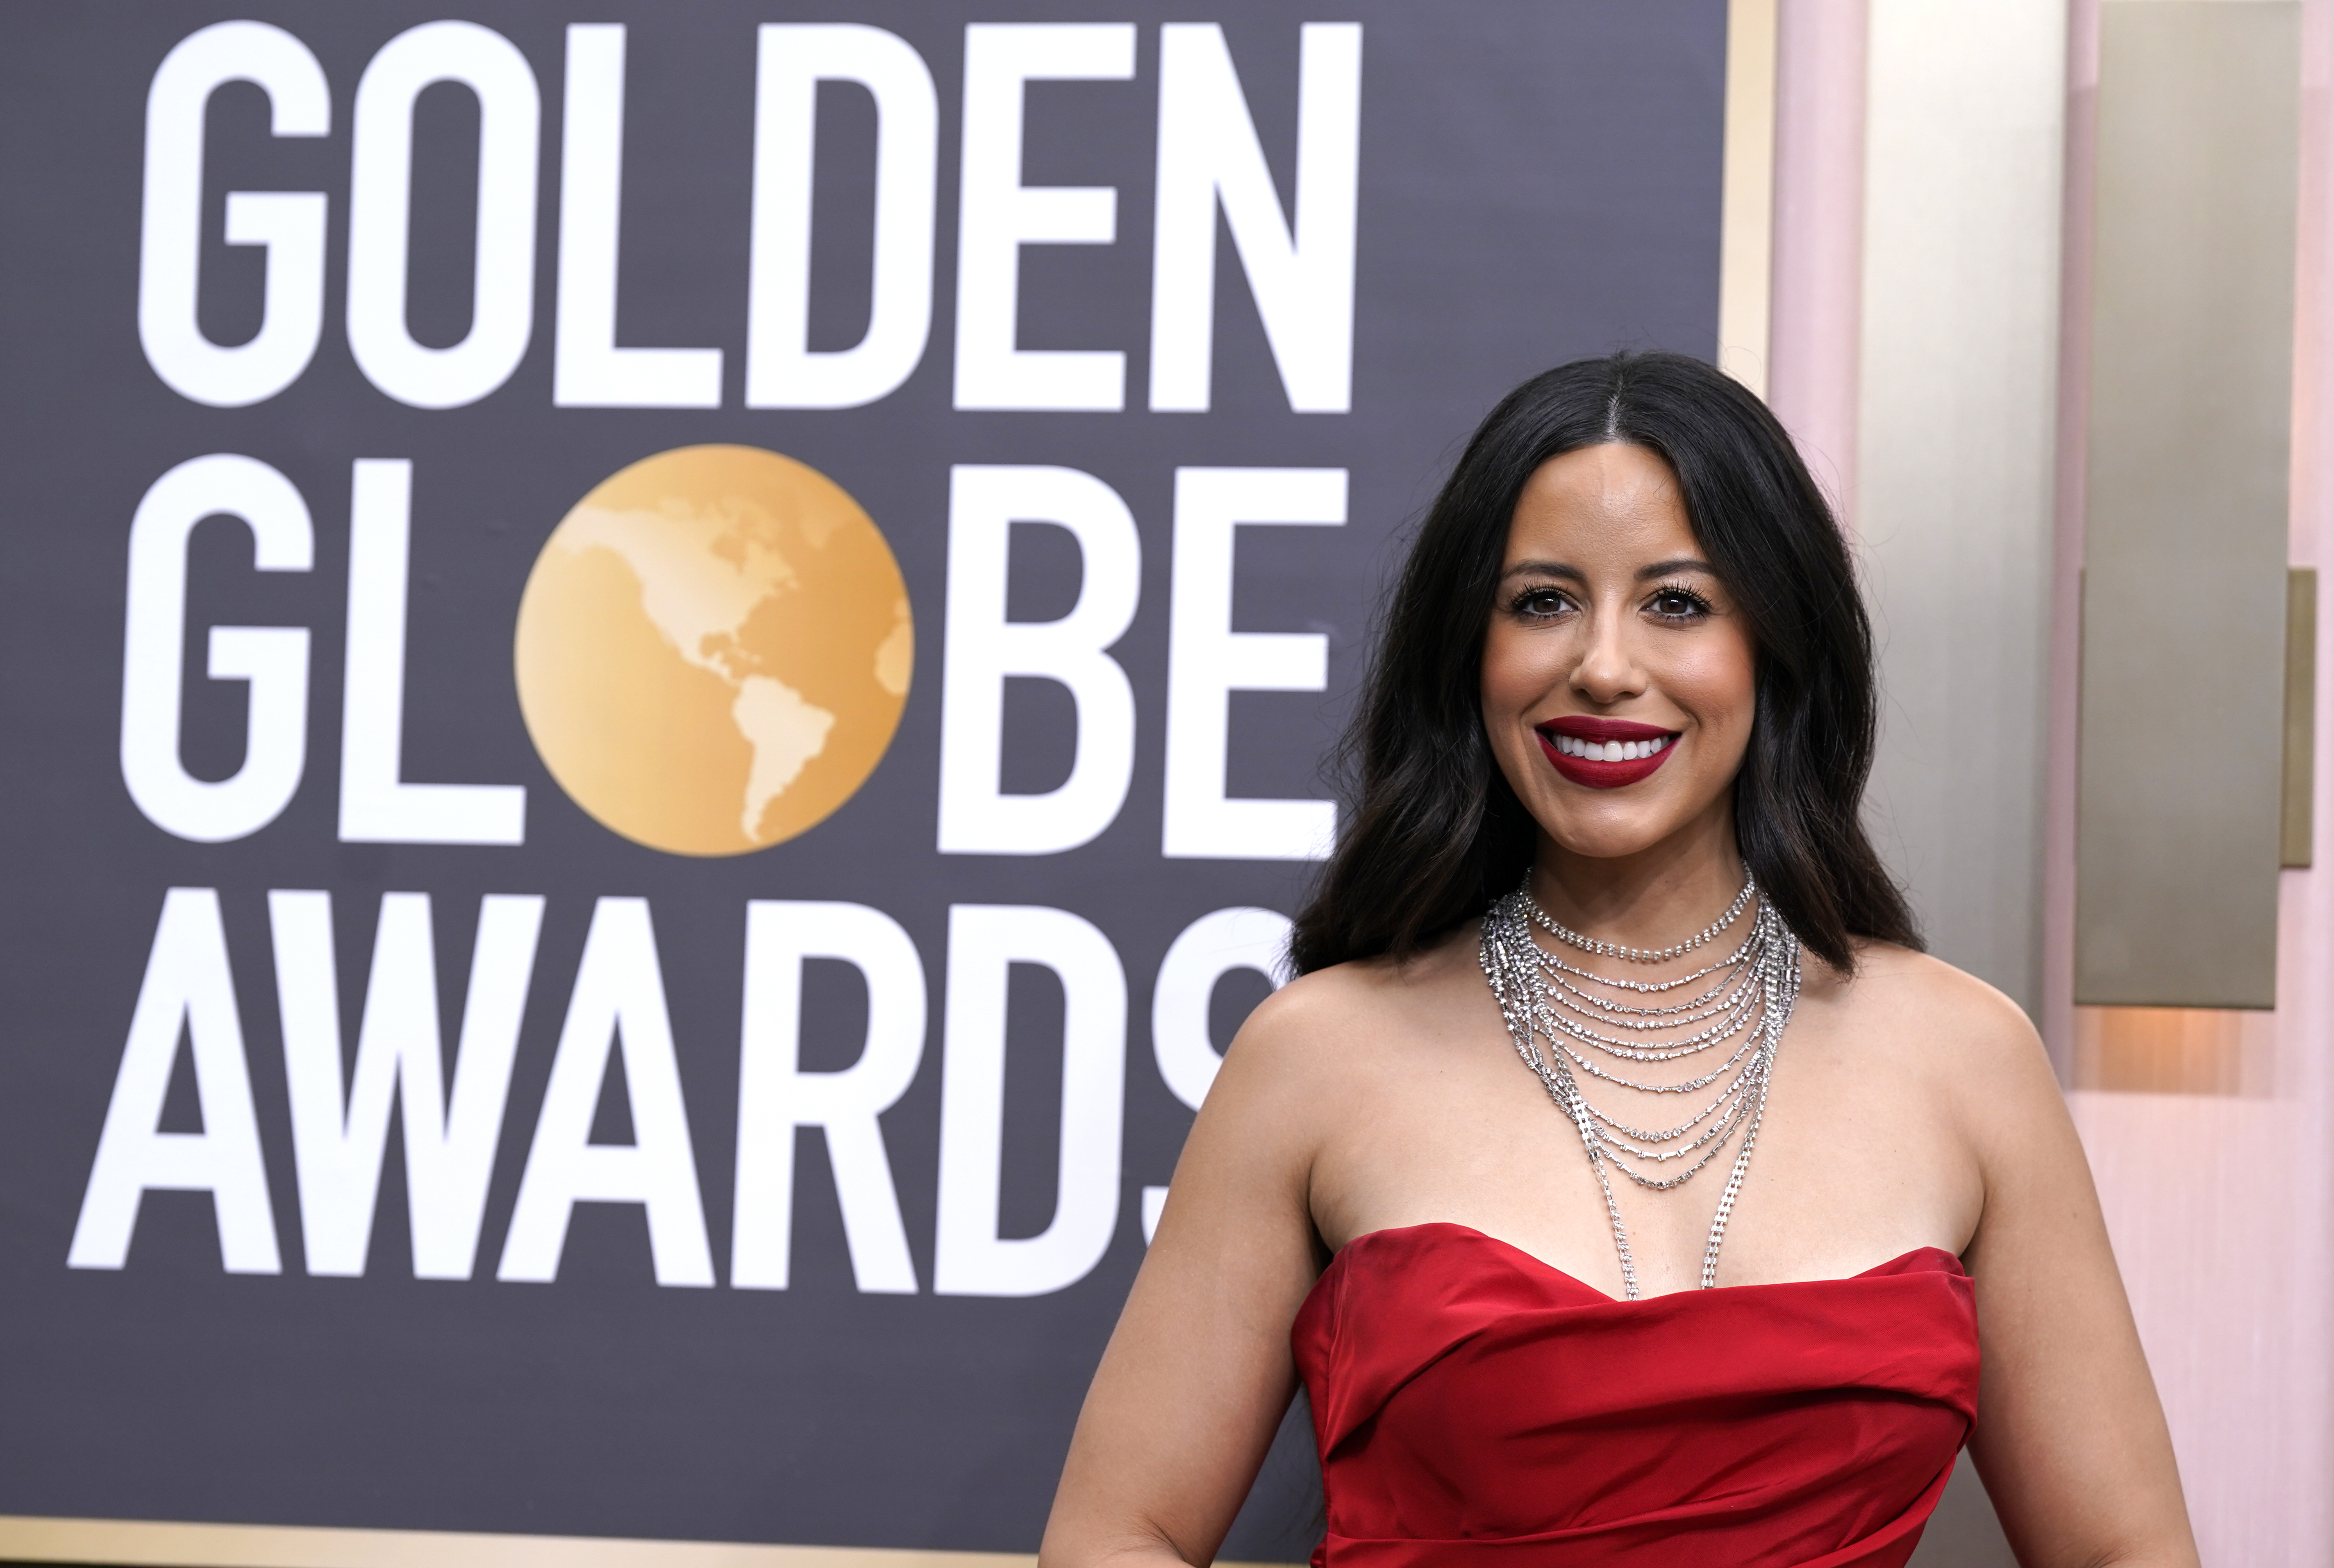 Naz Perez arrives at the 80th annual Golden Globe Awards at the Beverly Hilton Hotel on Tuesday, Jan. 10, 2023, in Beverly Hills, Calif. (Photo by Jordan Strauss/Invision/AP)